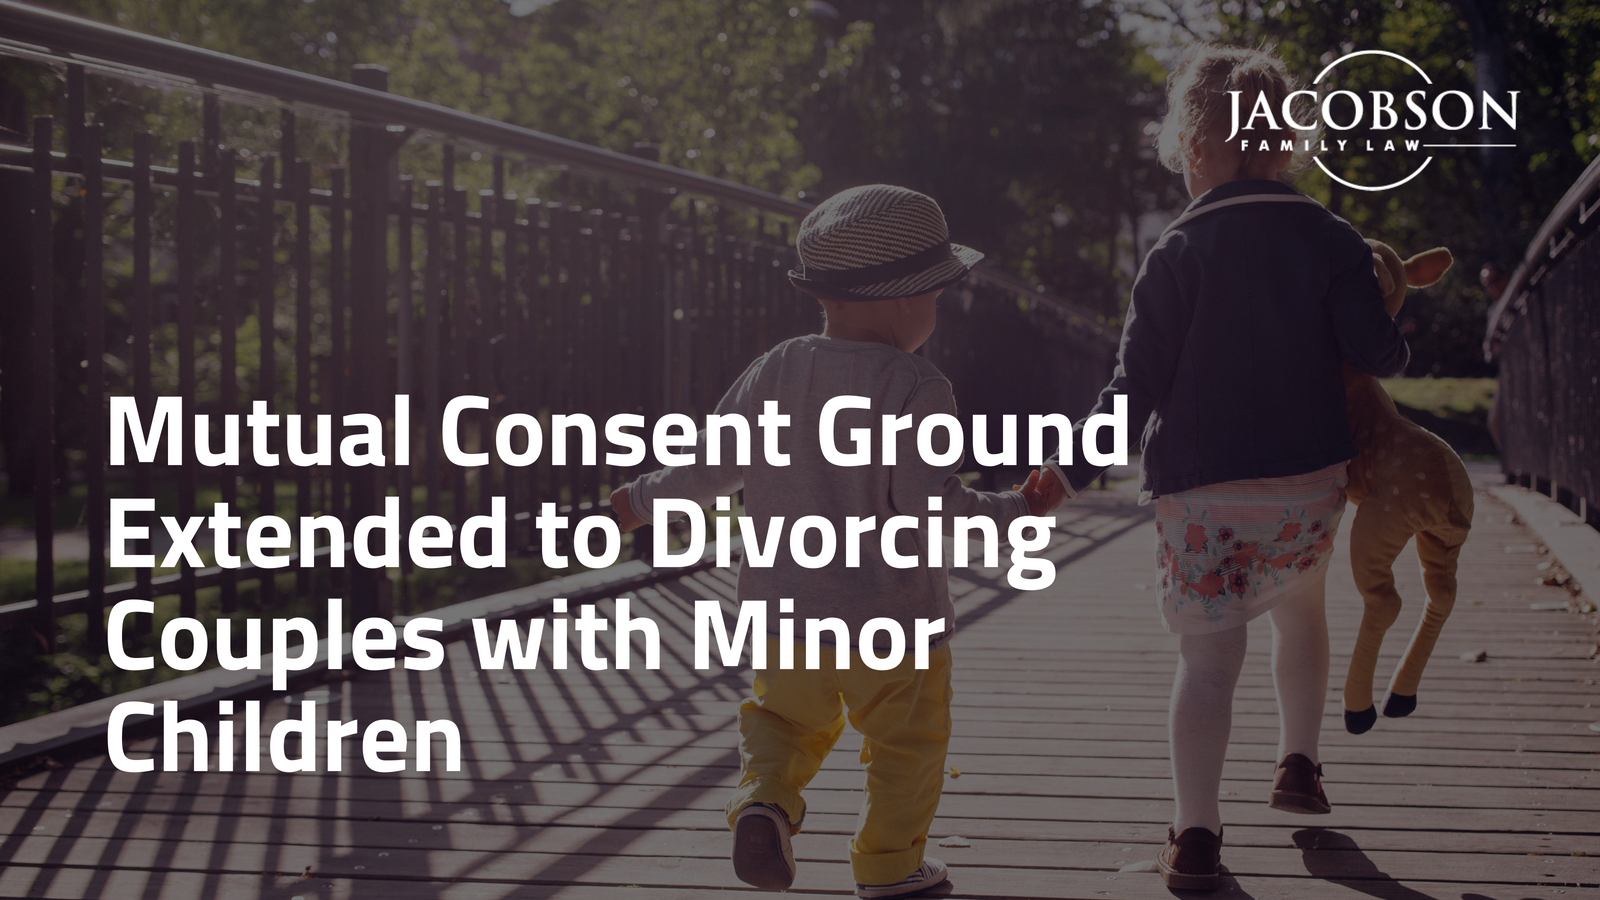 Mutual Consent Ground Extended to Divorcing Couples with Minor Children   Jacobson family law attorney maryland